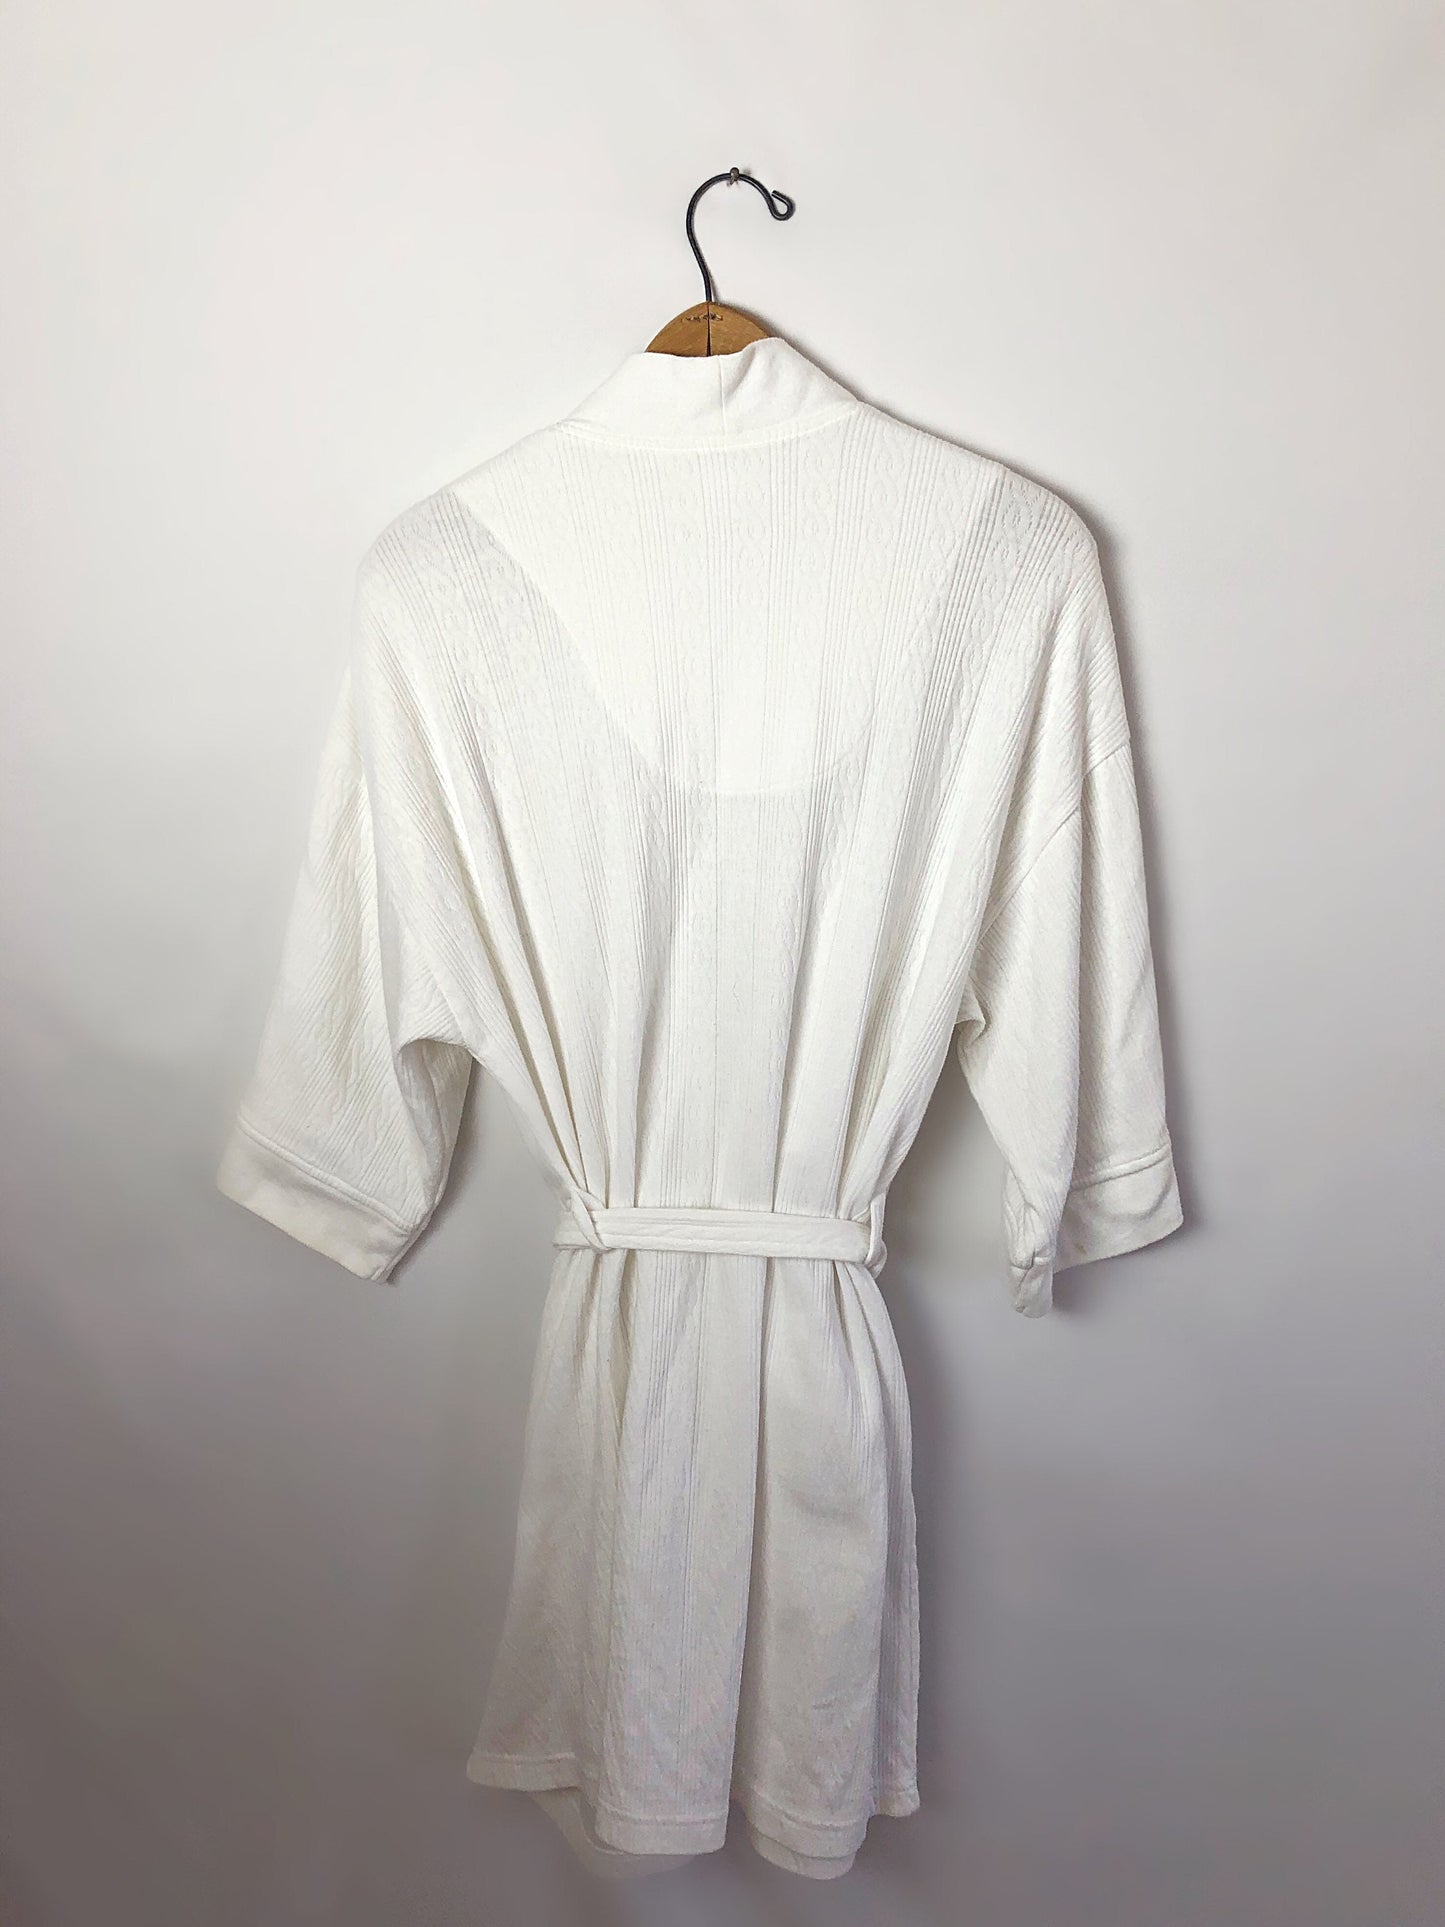 Vintage 90’s Laura Ashley White Spa Short Robe with Pockets Wms Size Small